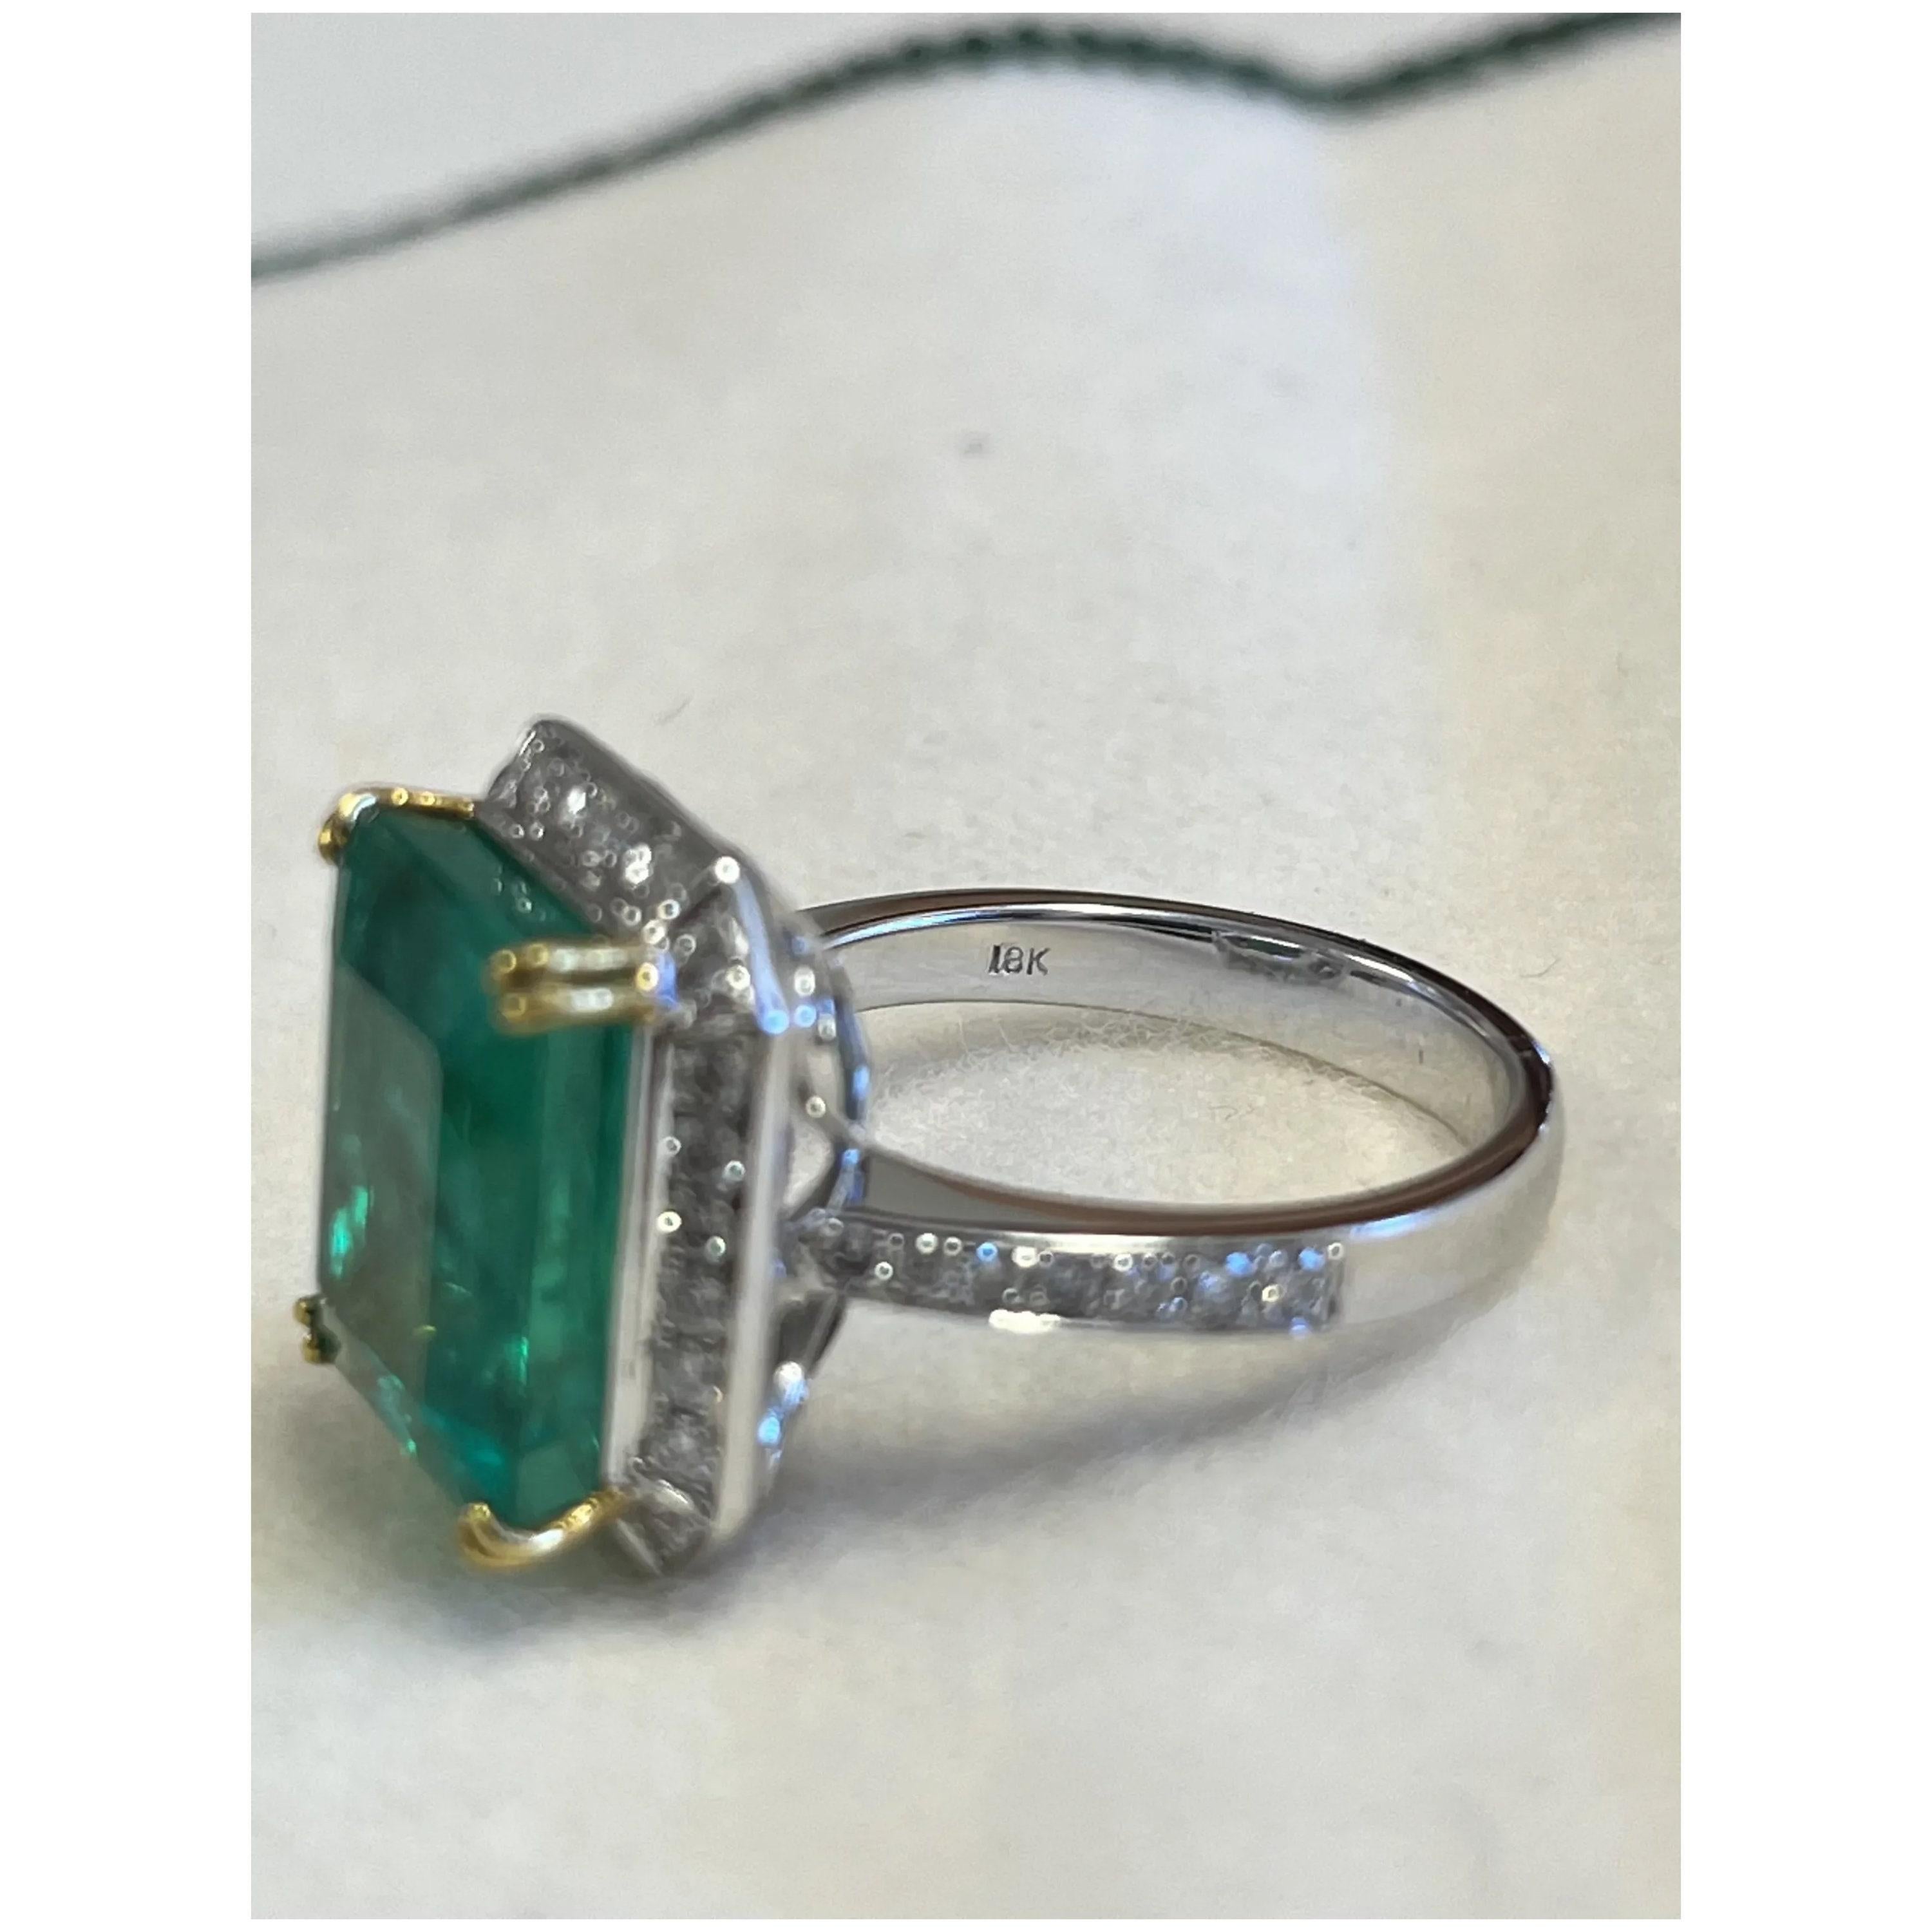 For Sale:  5 Carat Natural Emerald Diamond Engagement Ring Set in 18K Gold, Cocktail Ring 2